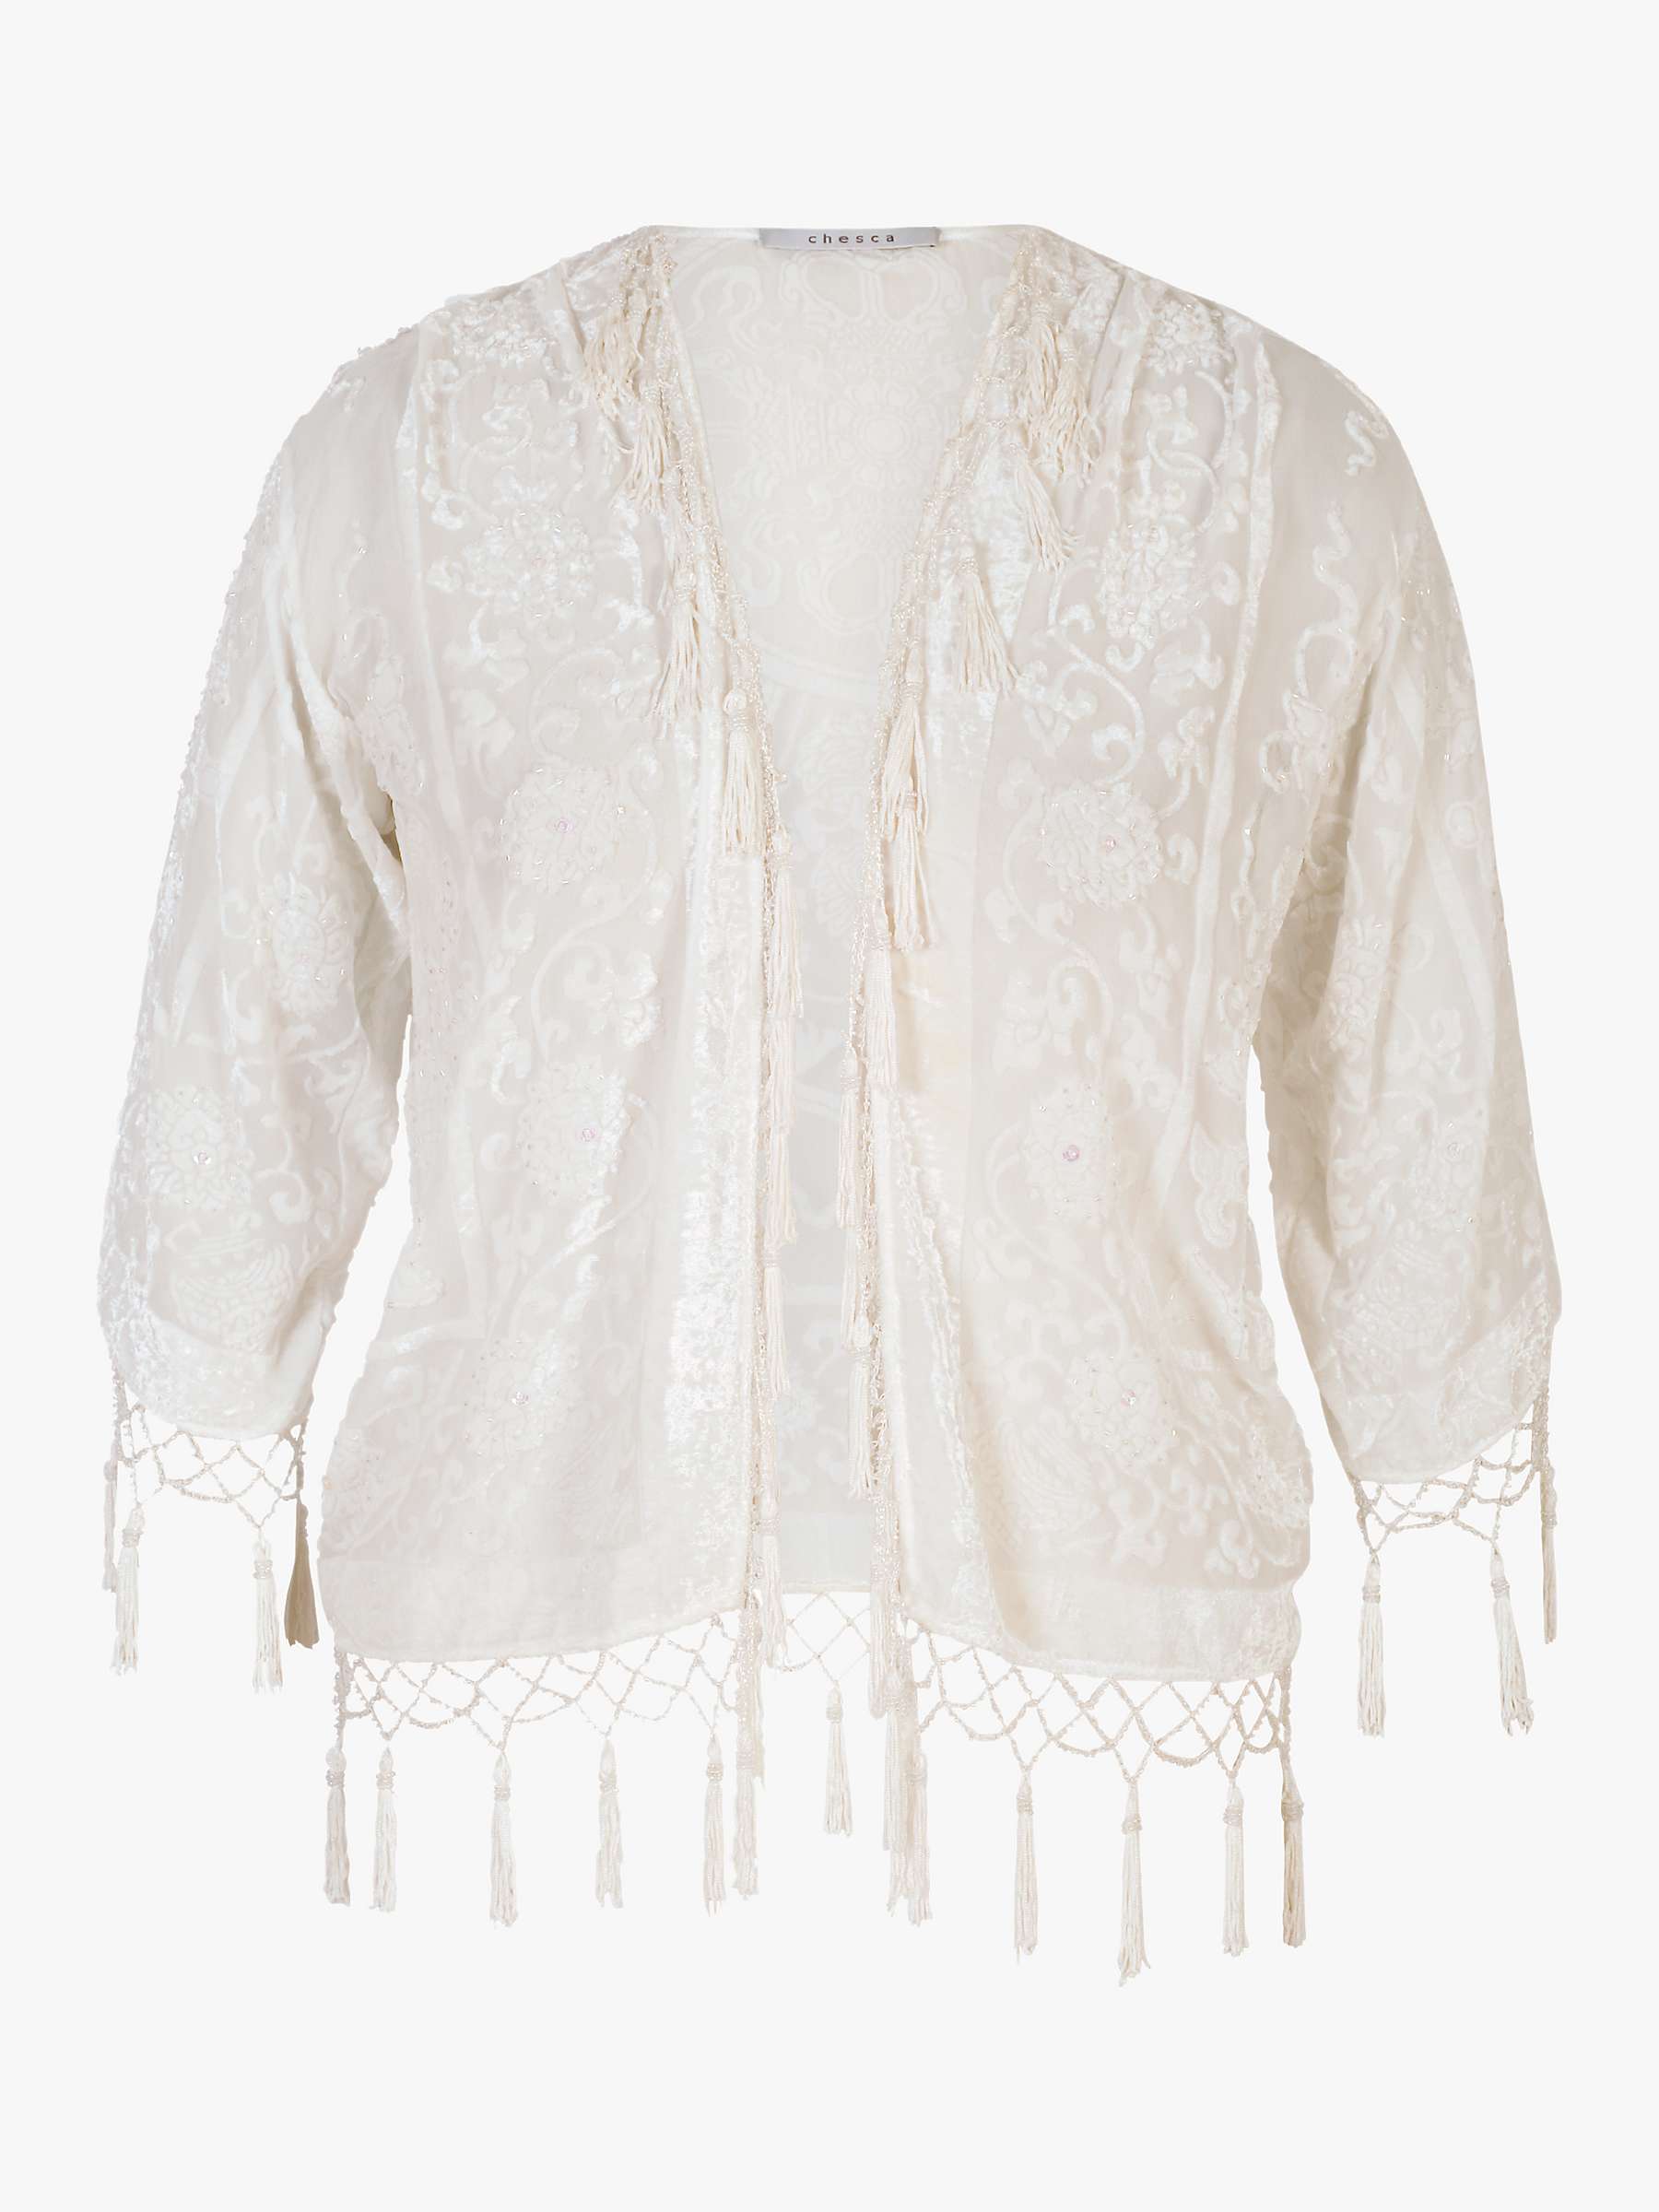 Buy chesca Bead Embellished Tassel Trim Coverup, White Online at johnlewis.com